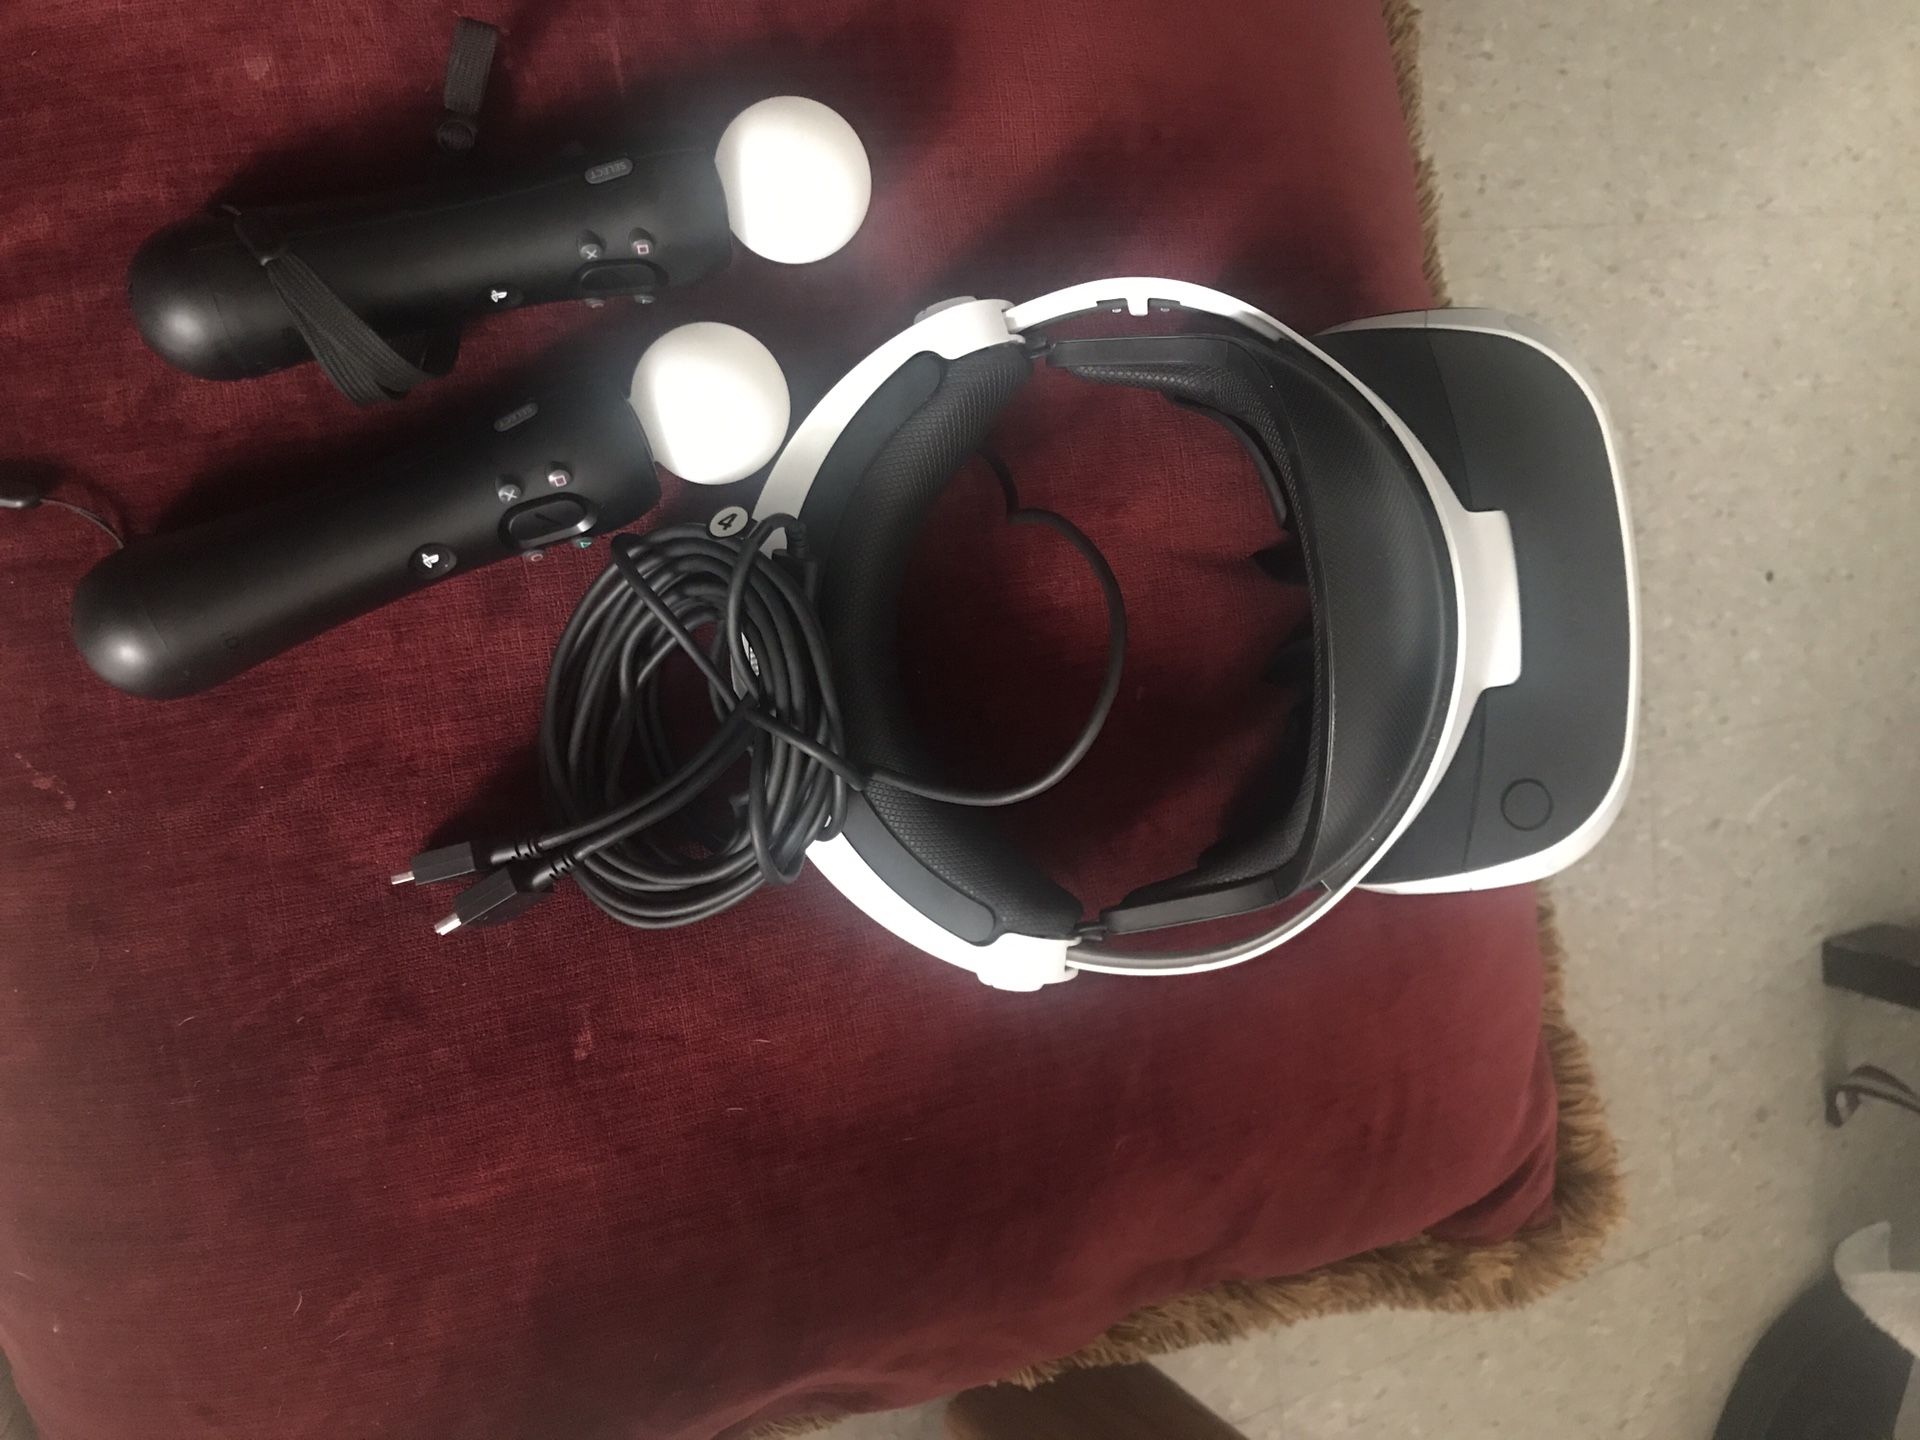 VR - Headset and control